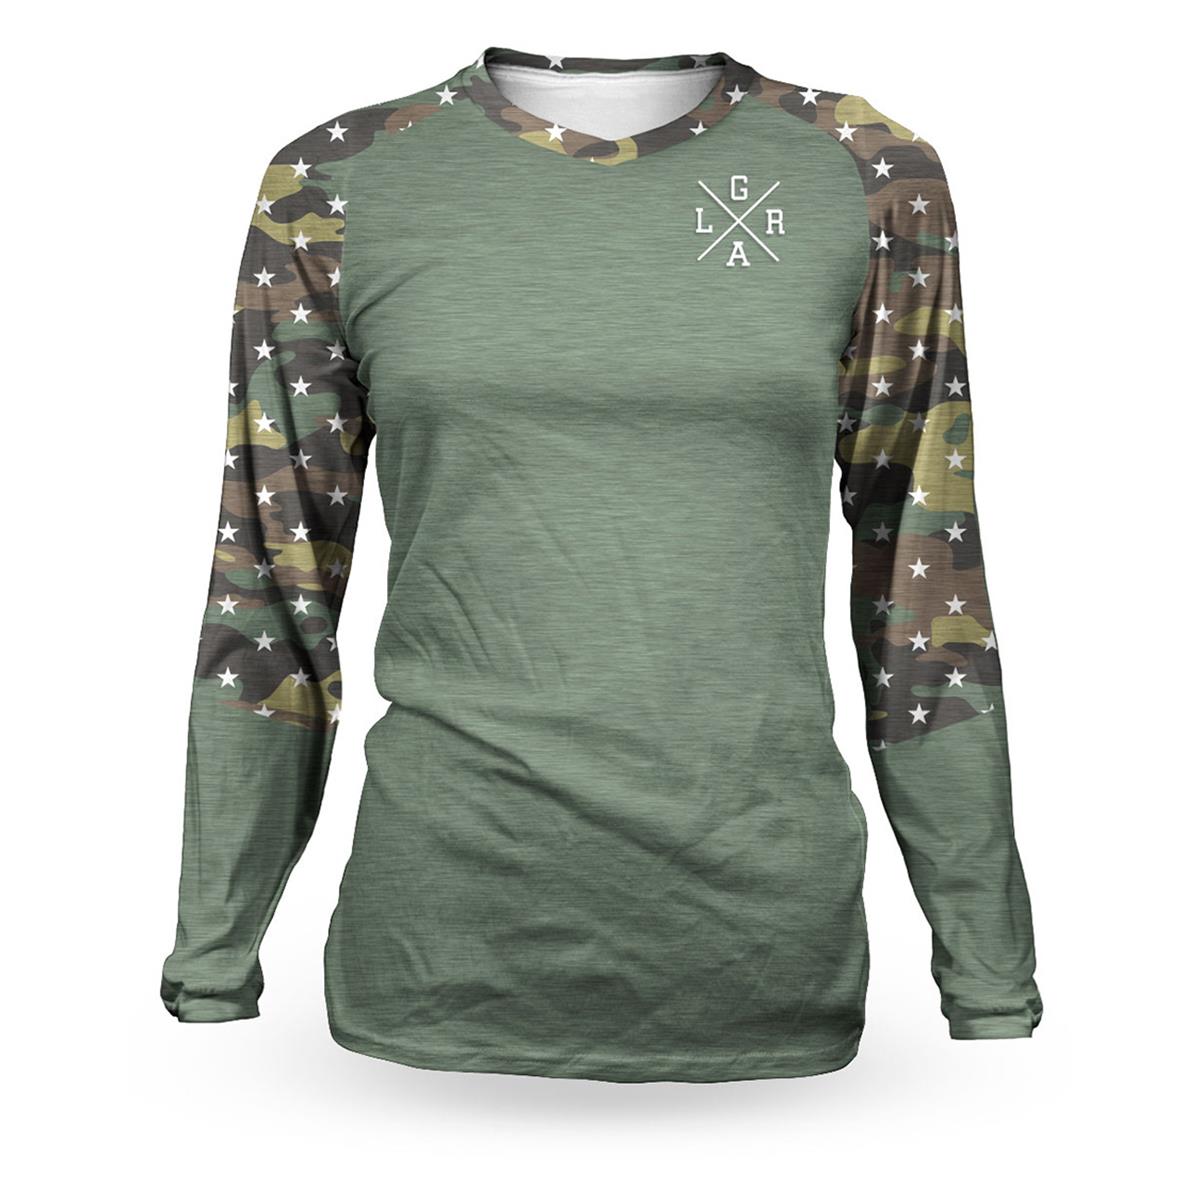 Loose Riders Femme Maillot VTT Manches Longues  Camo - Green